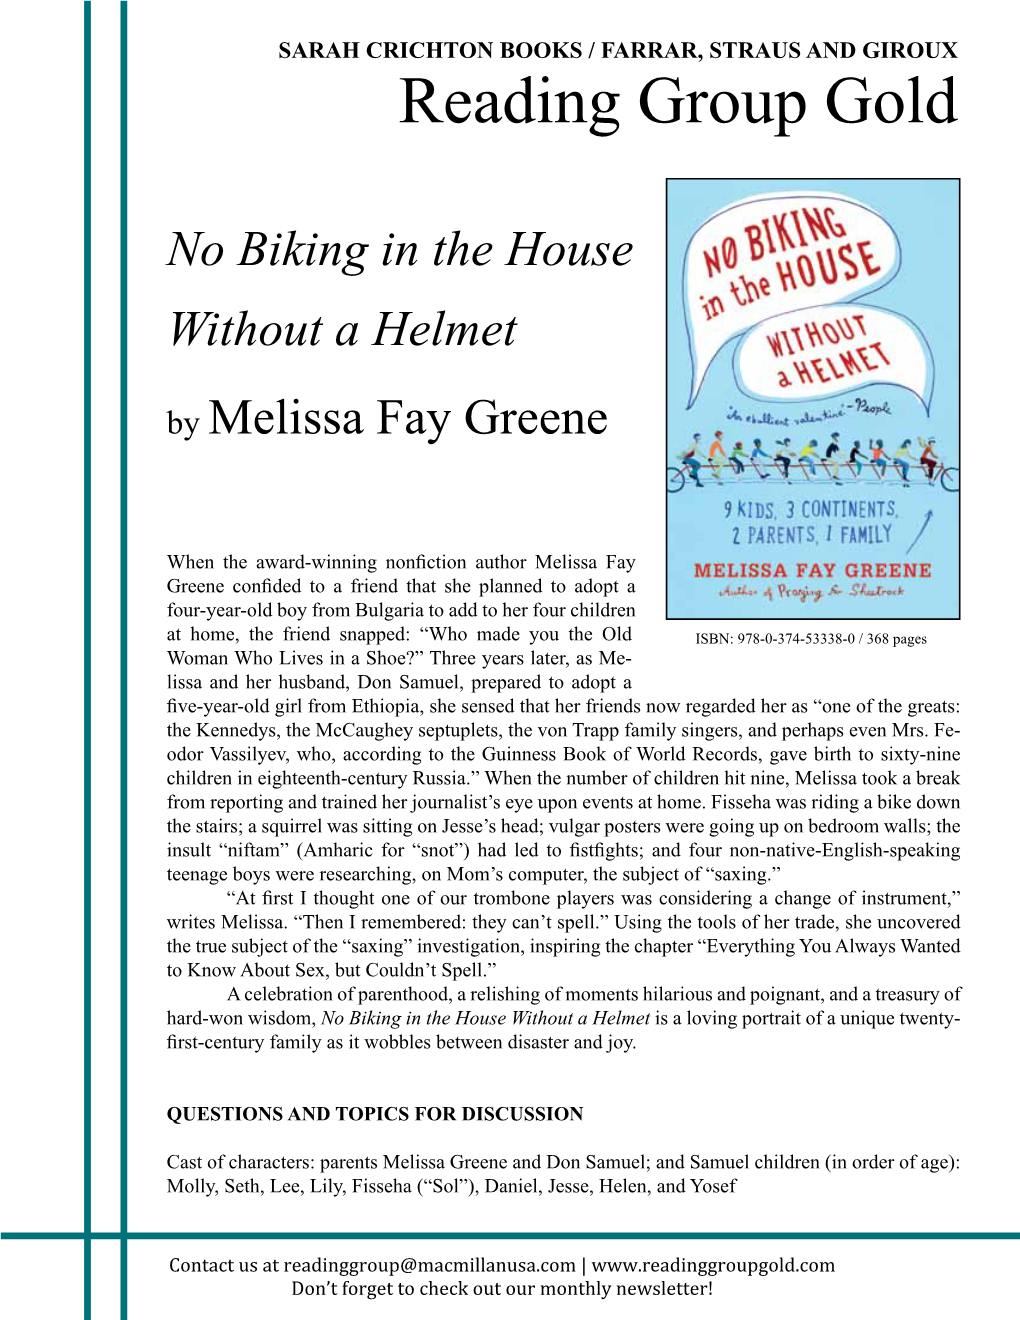 No Biking in the House Without a Helmet by Melissa Fay Greene